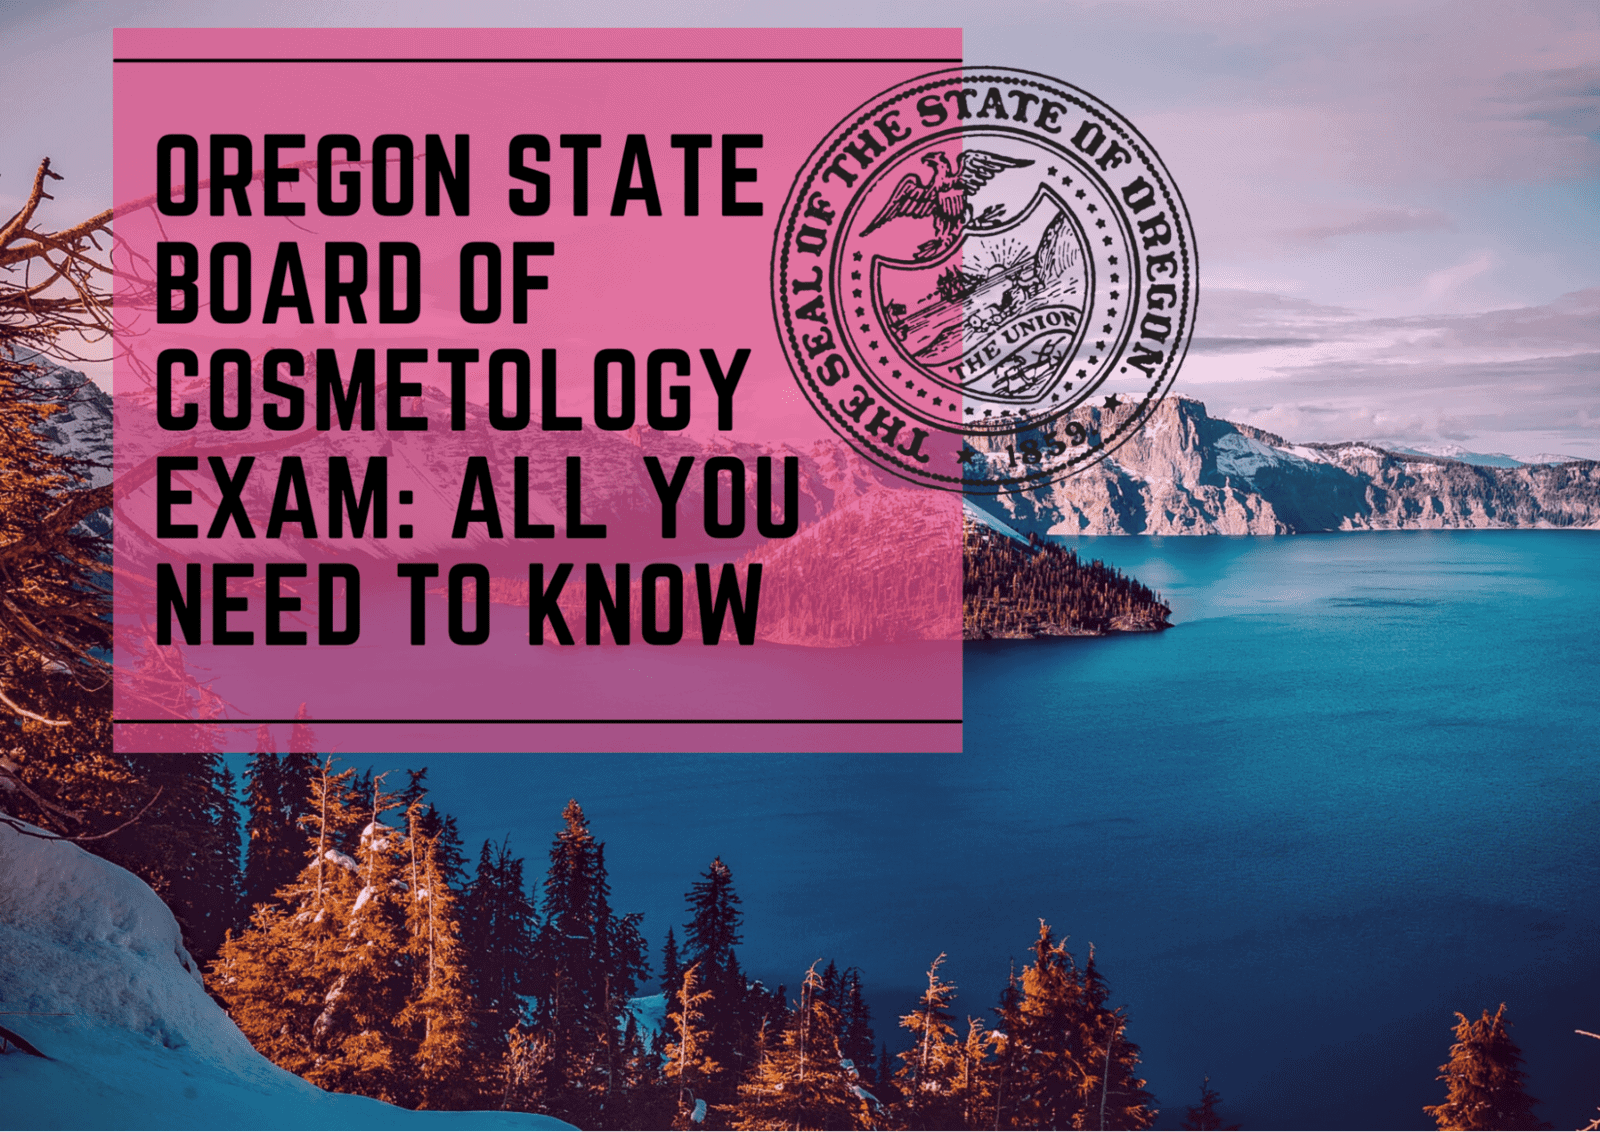 Know everything about Oregon State Cosmetology Exam